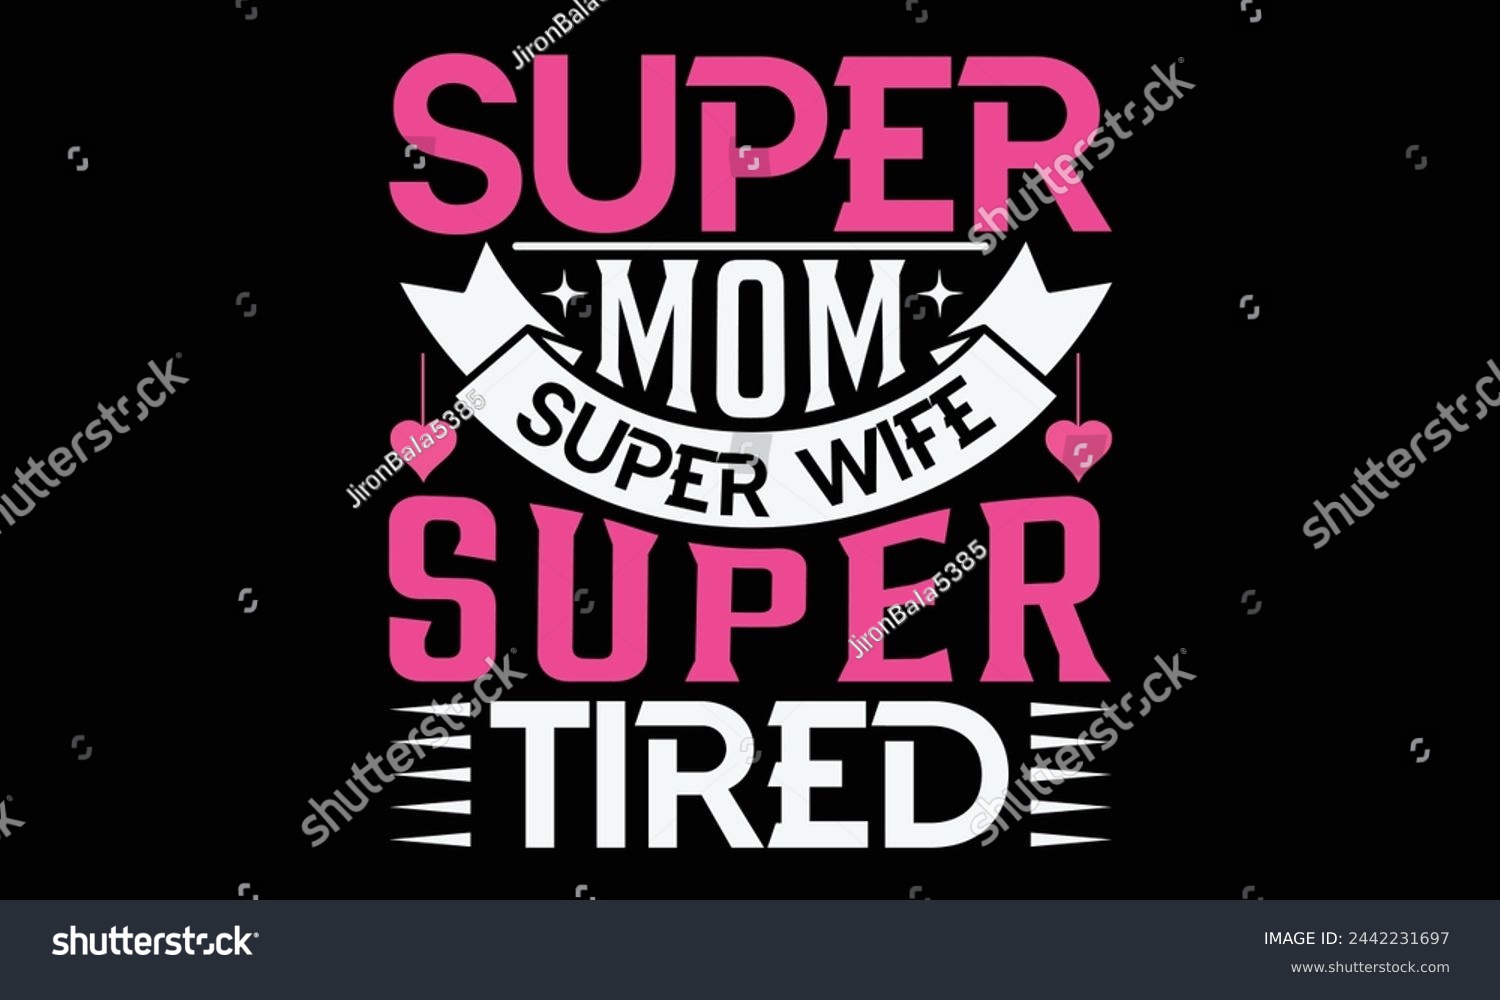 SVG of Super mom super wife super tired - Mom t-shirt design, isolated on white background, this illustration can be used as a print on t-shirts and bags, cover book, template, stationary or as a poster. svg